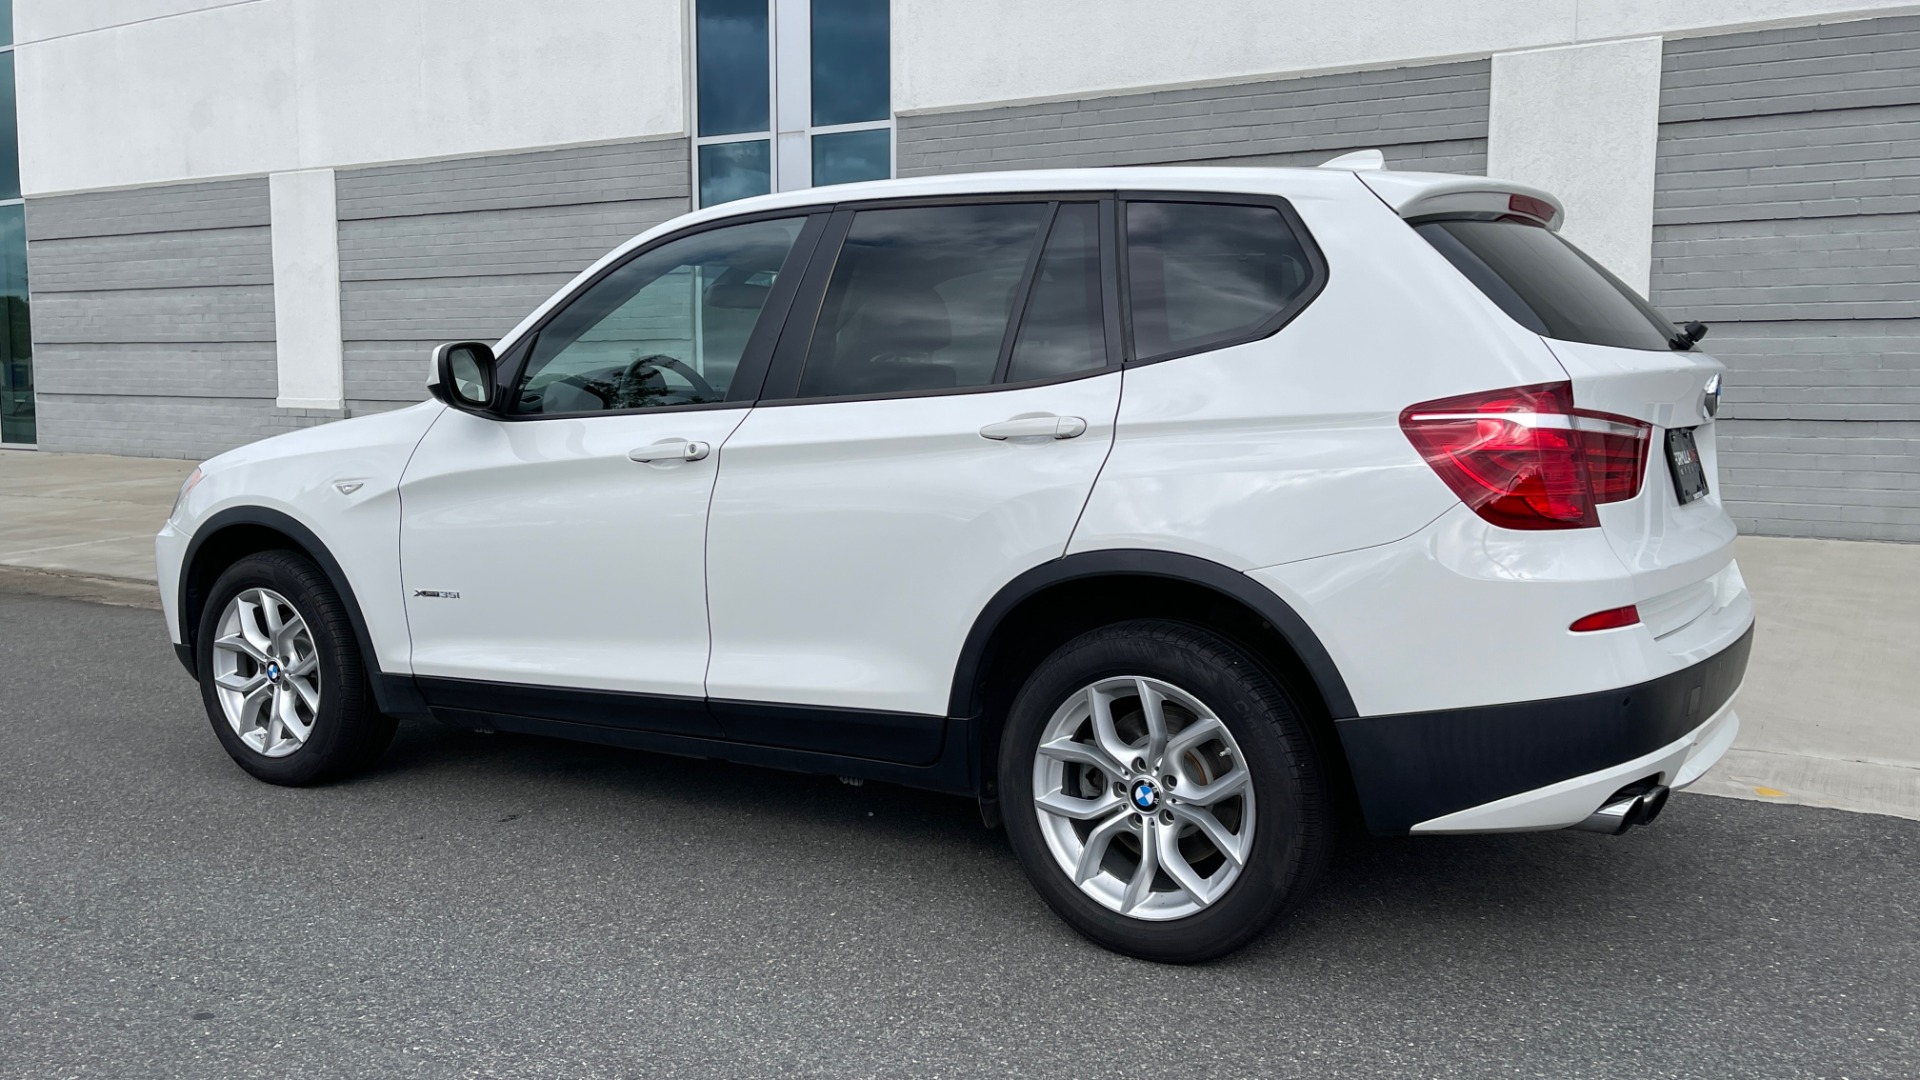 Used 2013 BMW X3 XDRIVE35I PREMIUM / TECHNOLOGY / COLD WTHR / REARVIEW for sale Sold at Formula Imports in Charlotte NC 28227 4